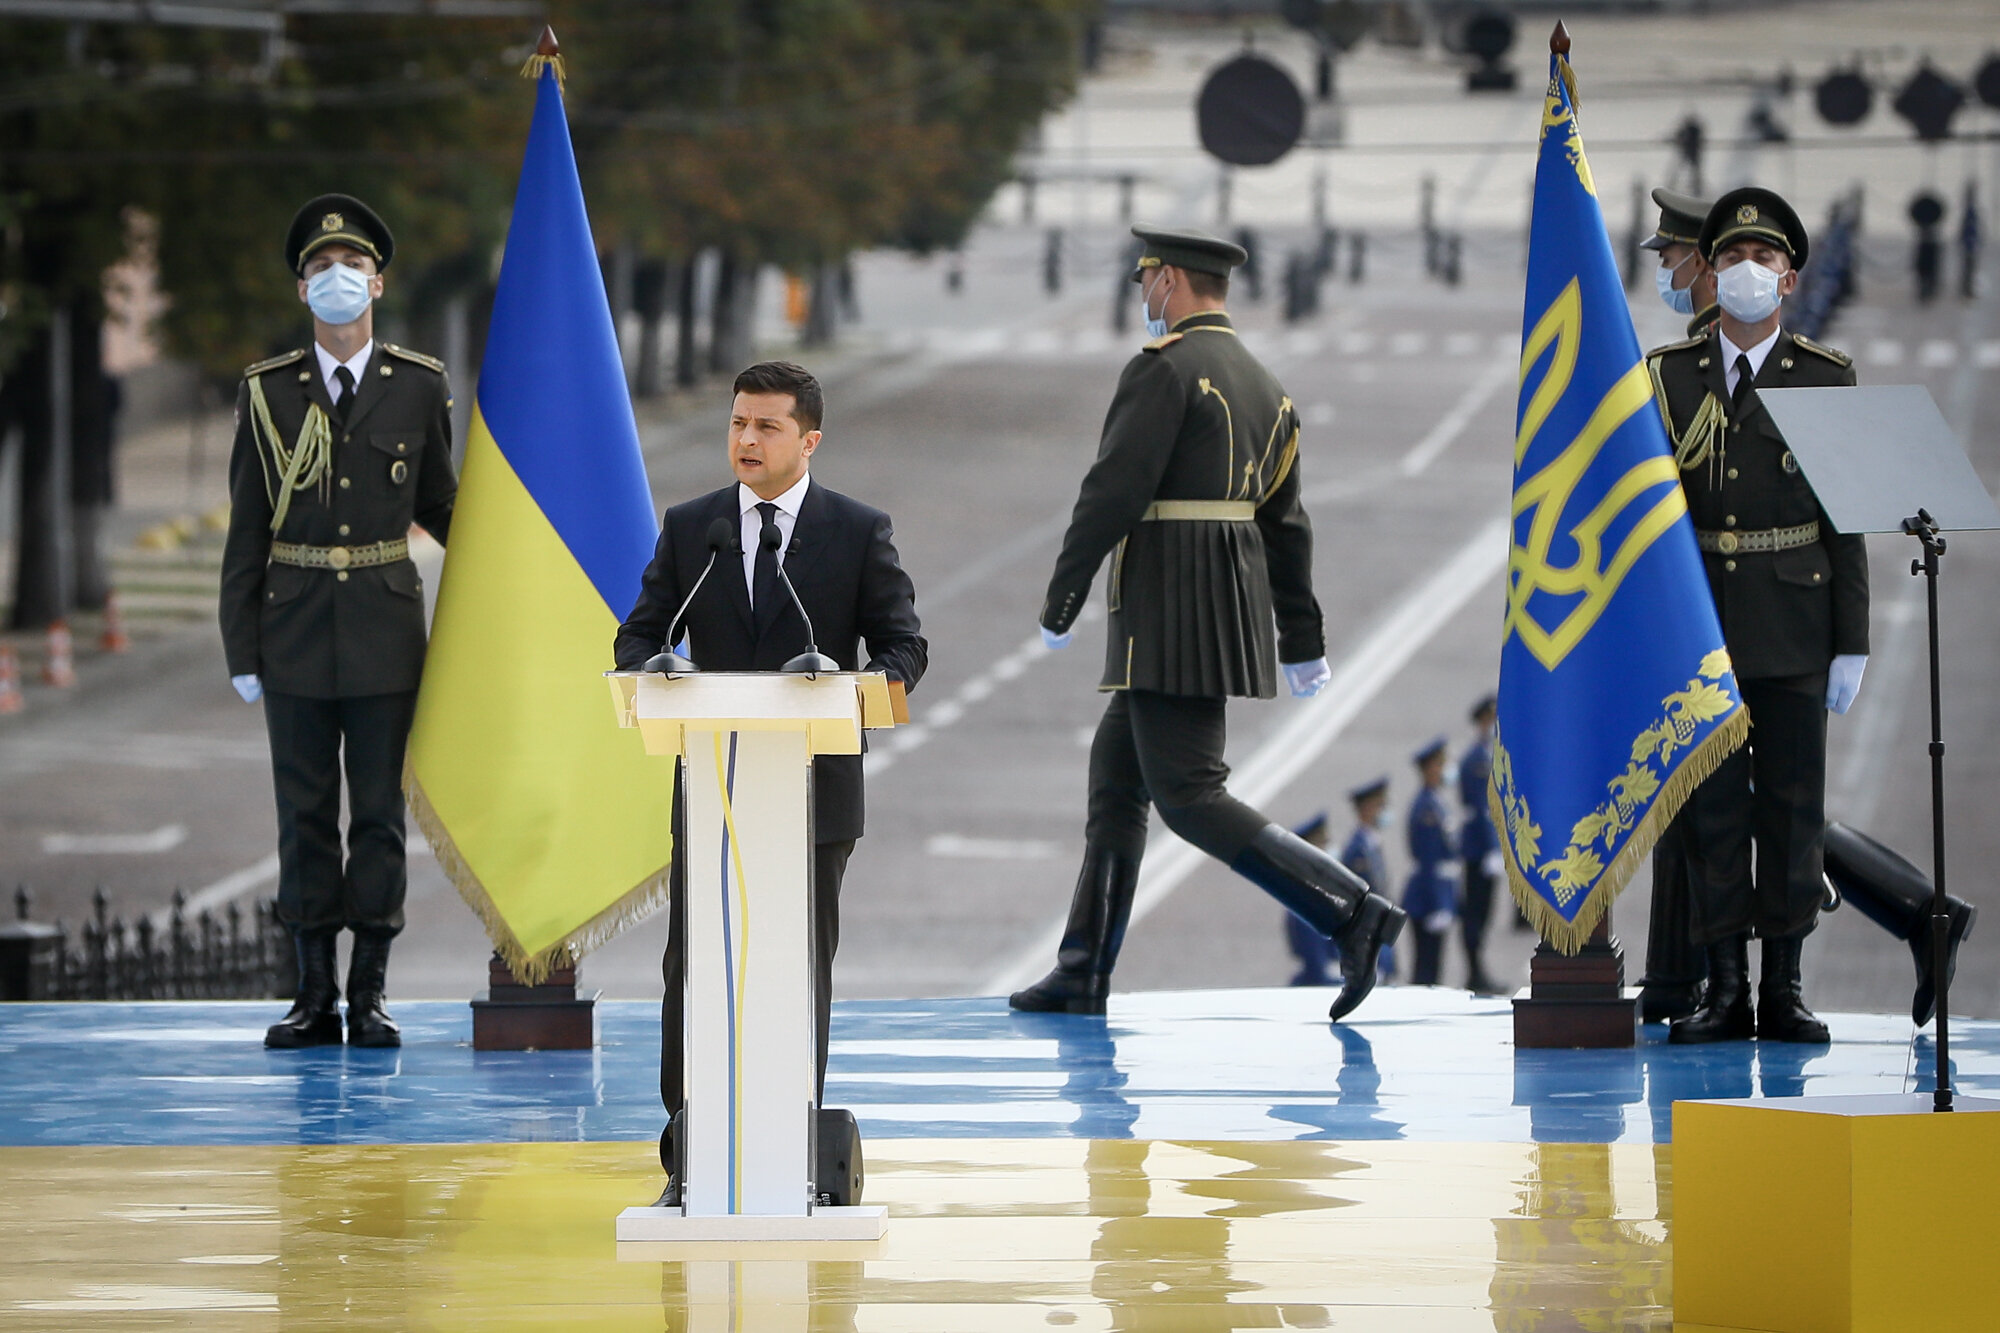 Ukrainian President Volodymyr Zelensky delivers a speech during a celebration of Ukraine&#8217;s Independence Day in Kyiv on Aug. 24, 2020.